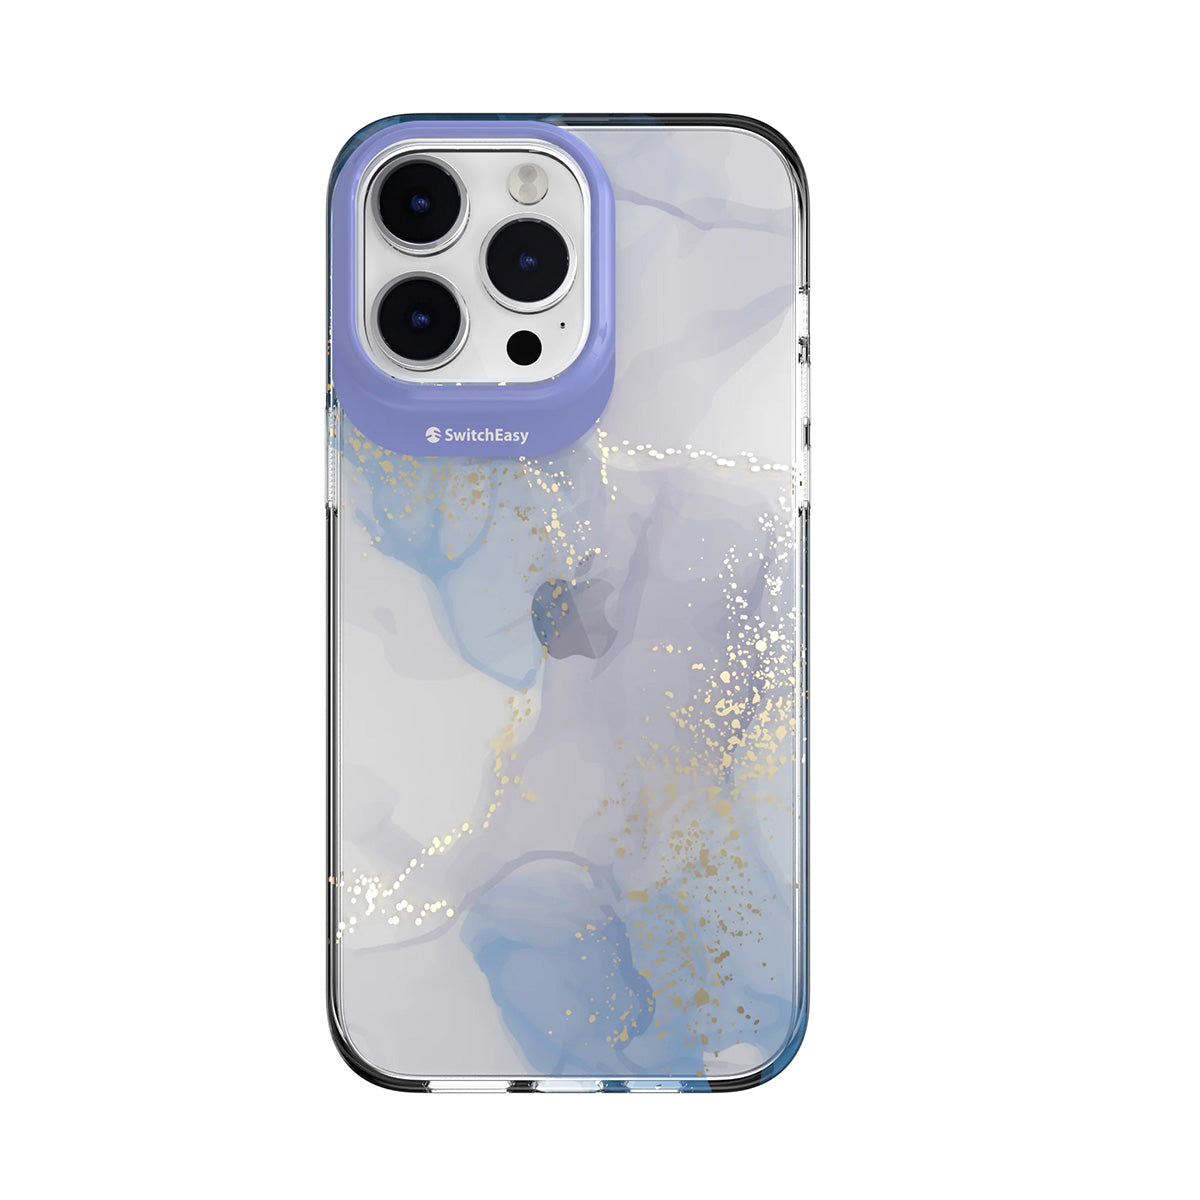 SwitchEasy Artist Double In-Mold Decoration Case for iPhone 14 Series (Veil)